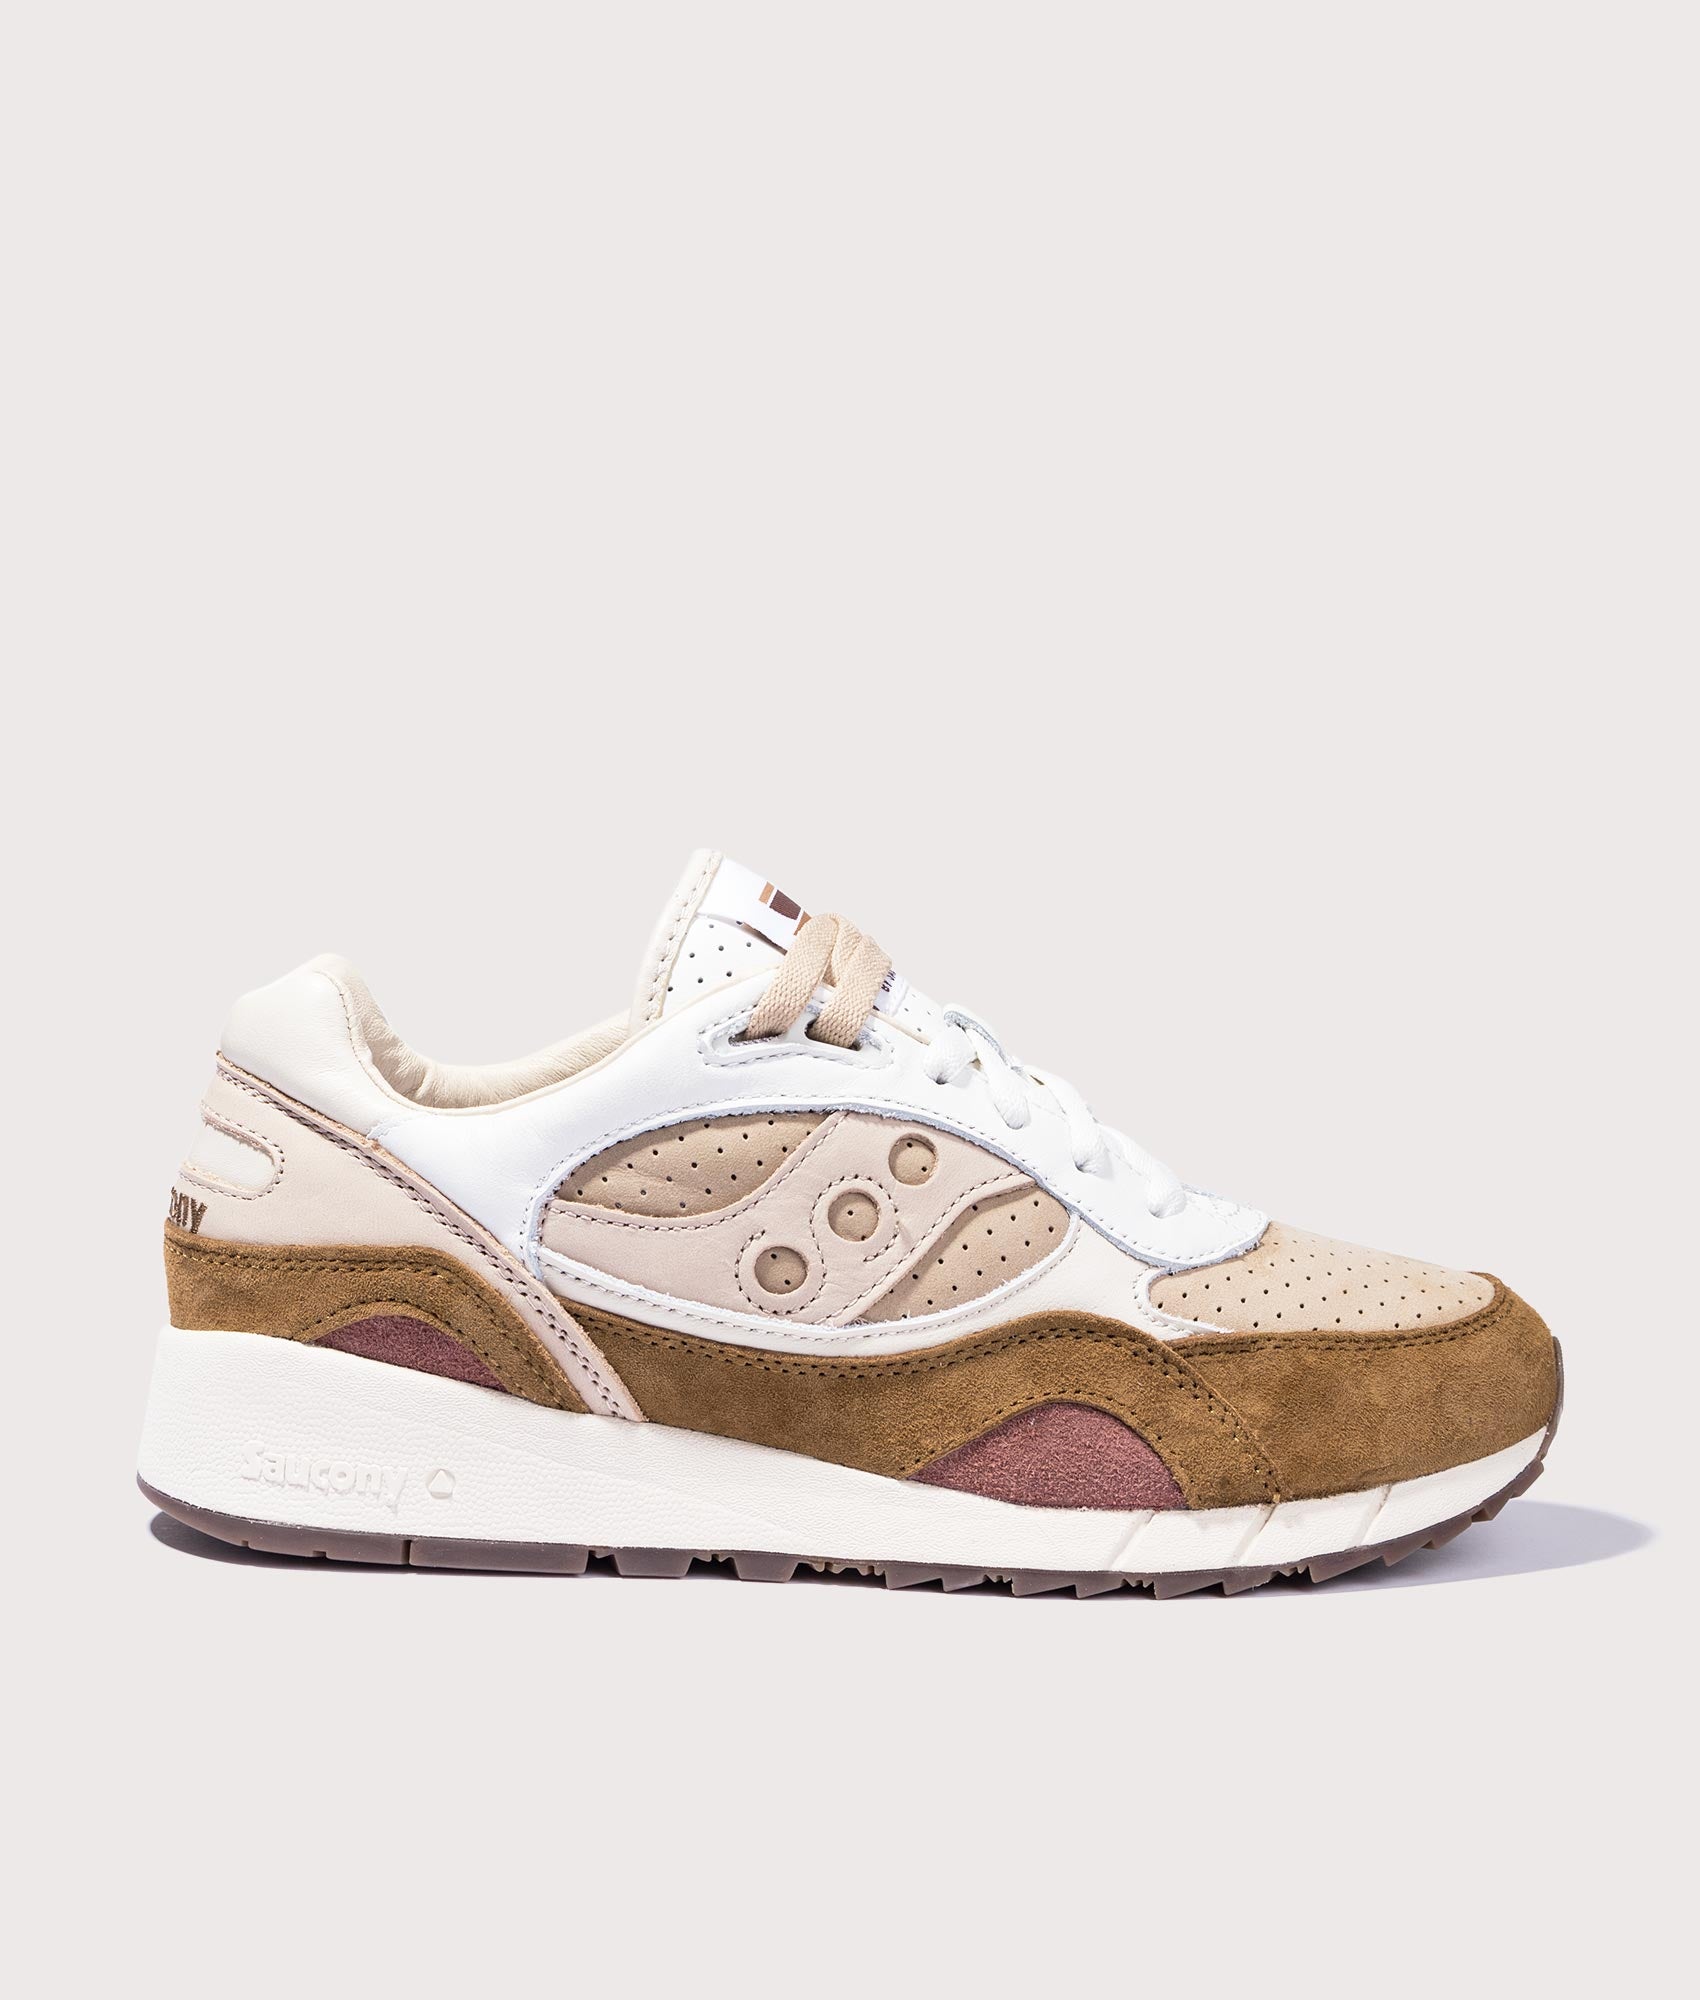 Saucony Mens Shadow 6000 Cappuccino Sneakers - Colour: 200 Brown/White - Size: 9